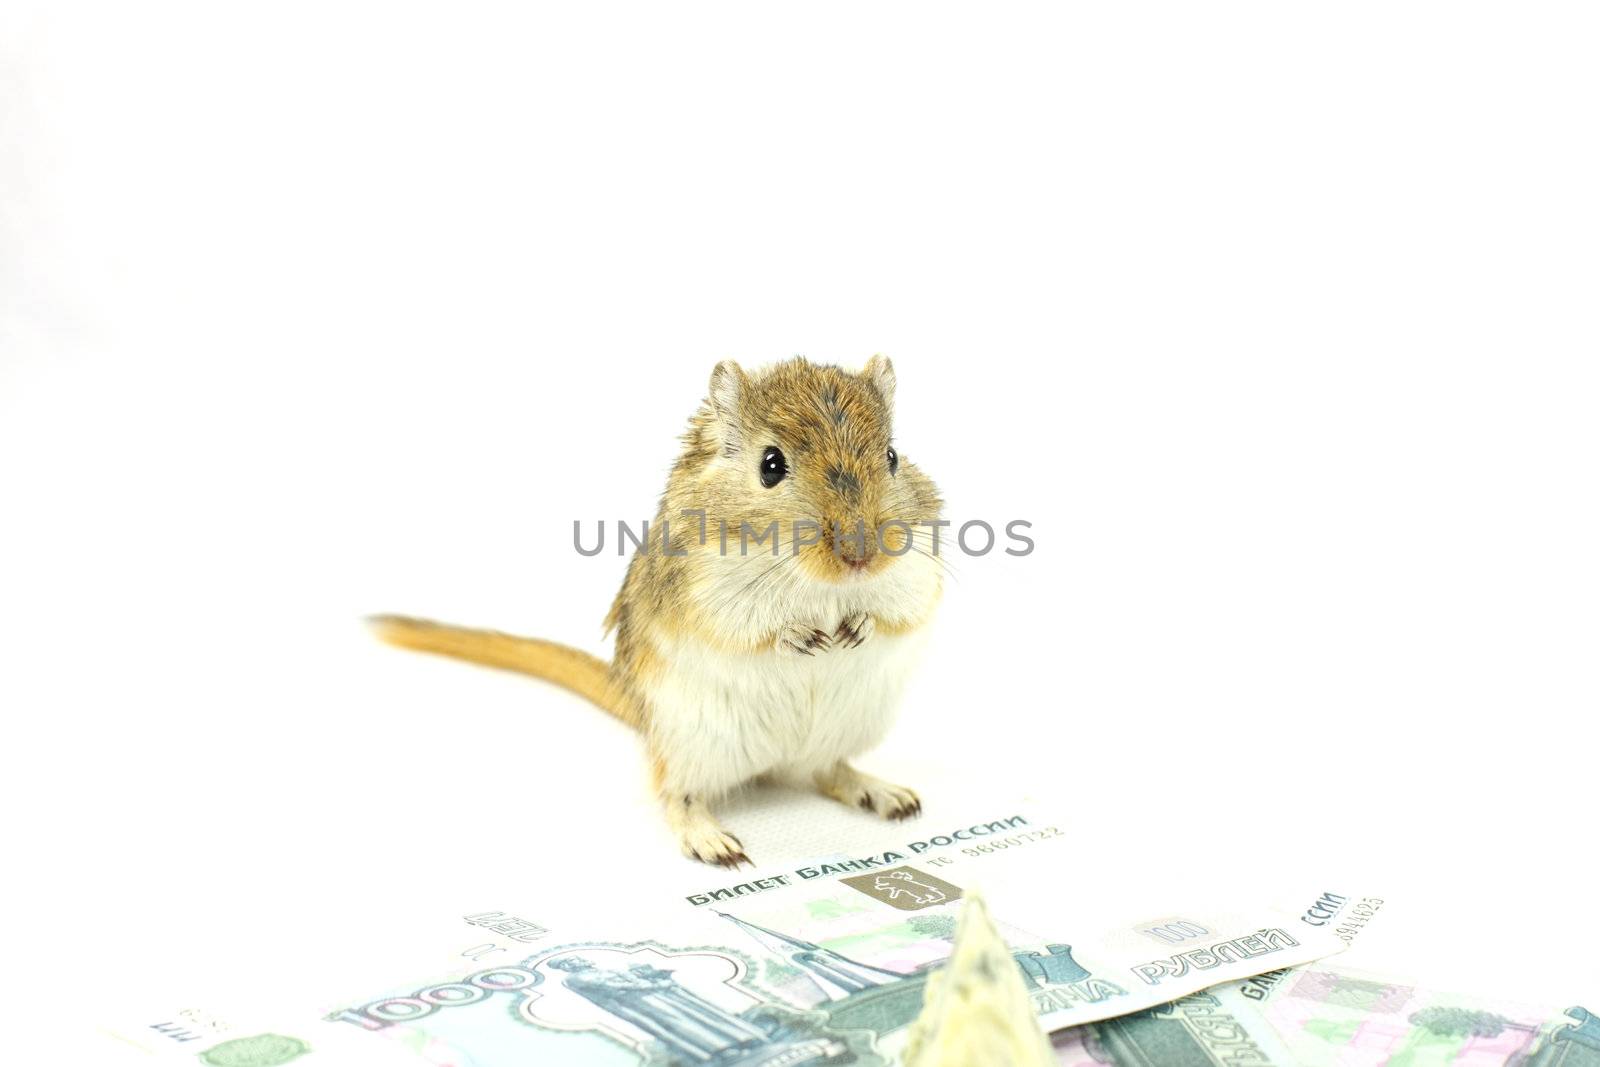 The mouse and money by fedlog